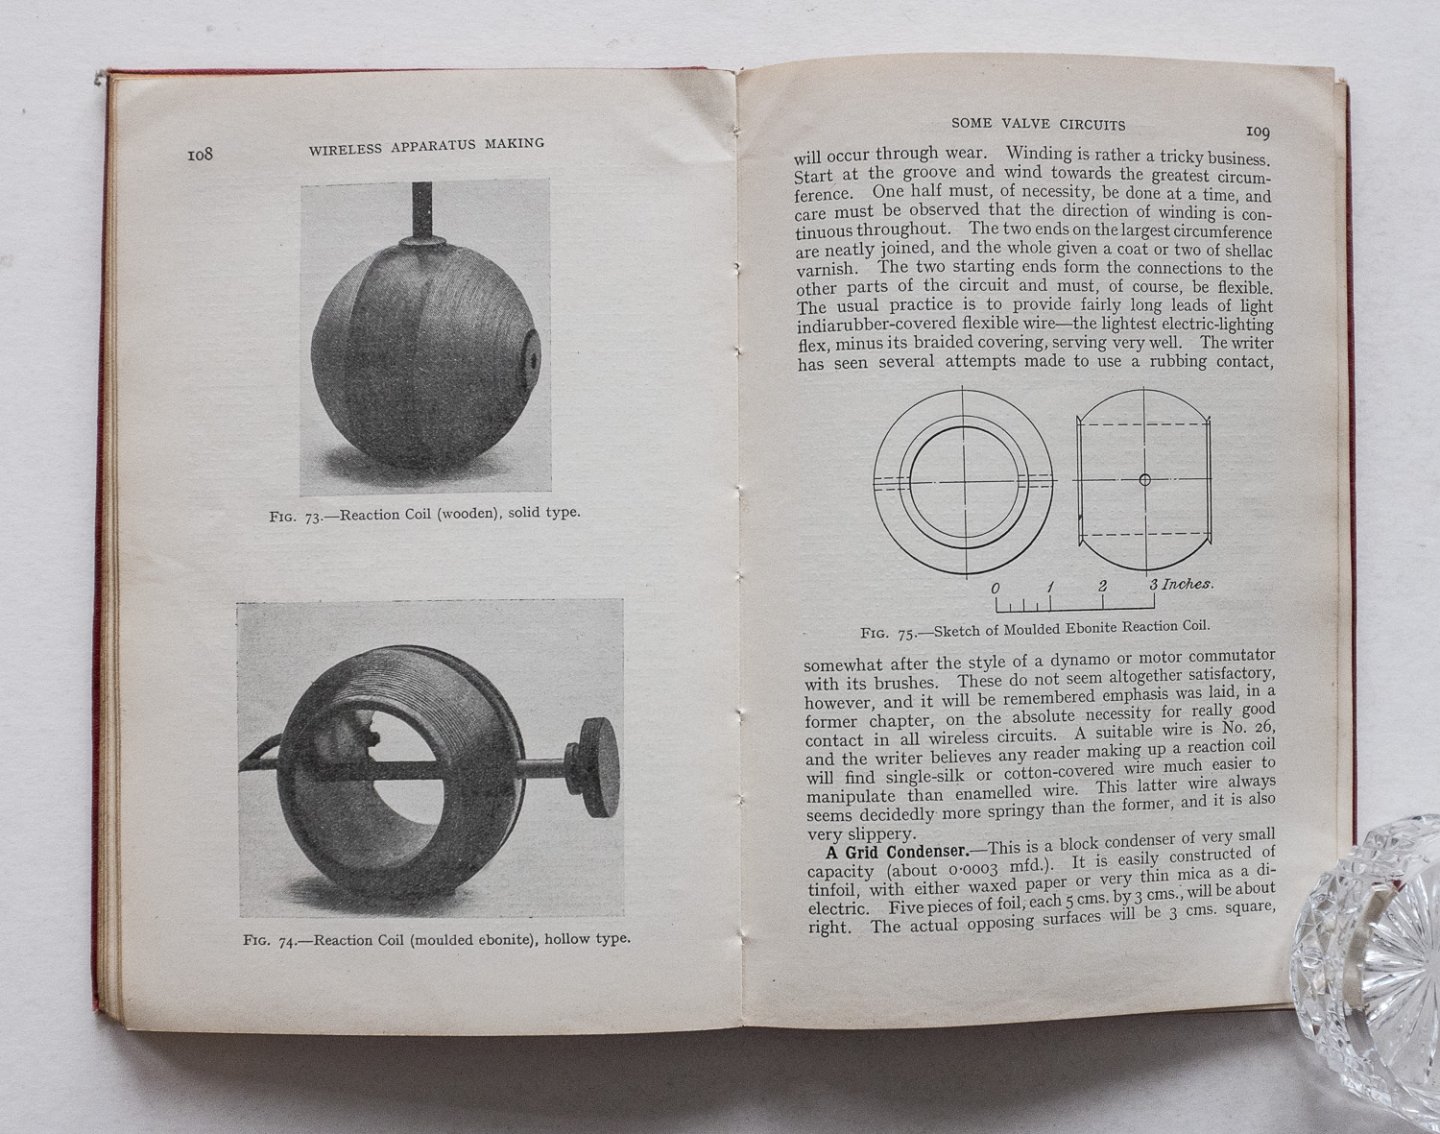 Ballhatchet, A.V. - Wireless apparatus making - a practical handbook on the design, construction, and operation of apparatus for the reception of wireless messages